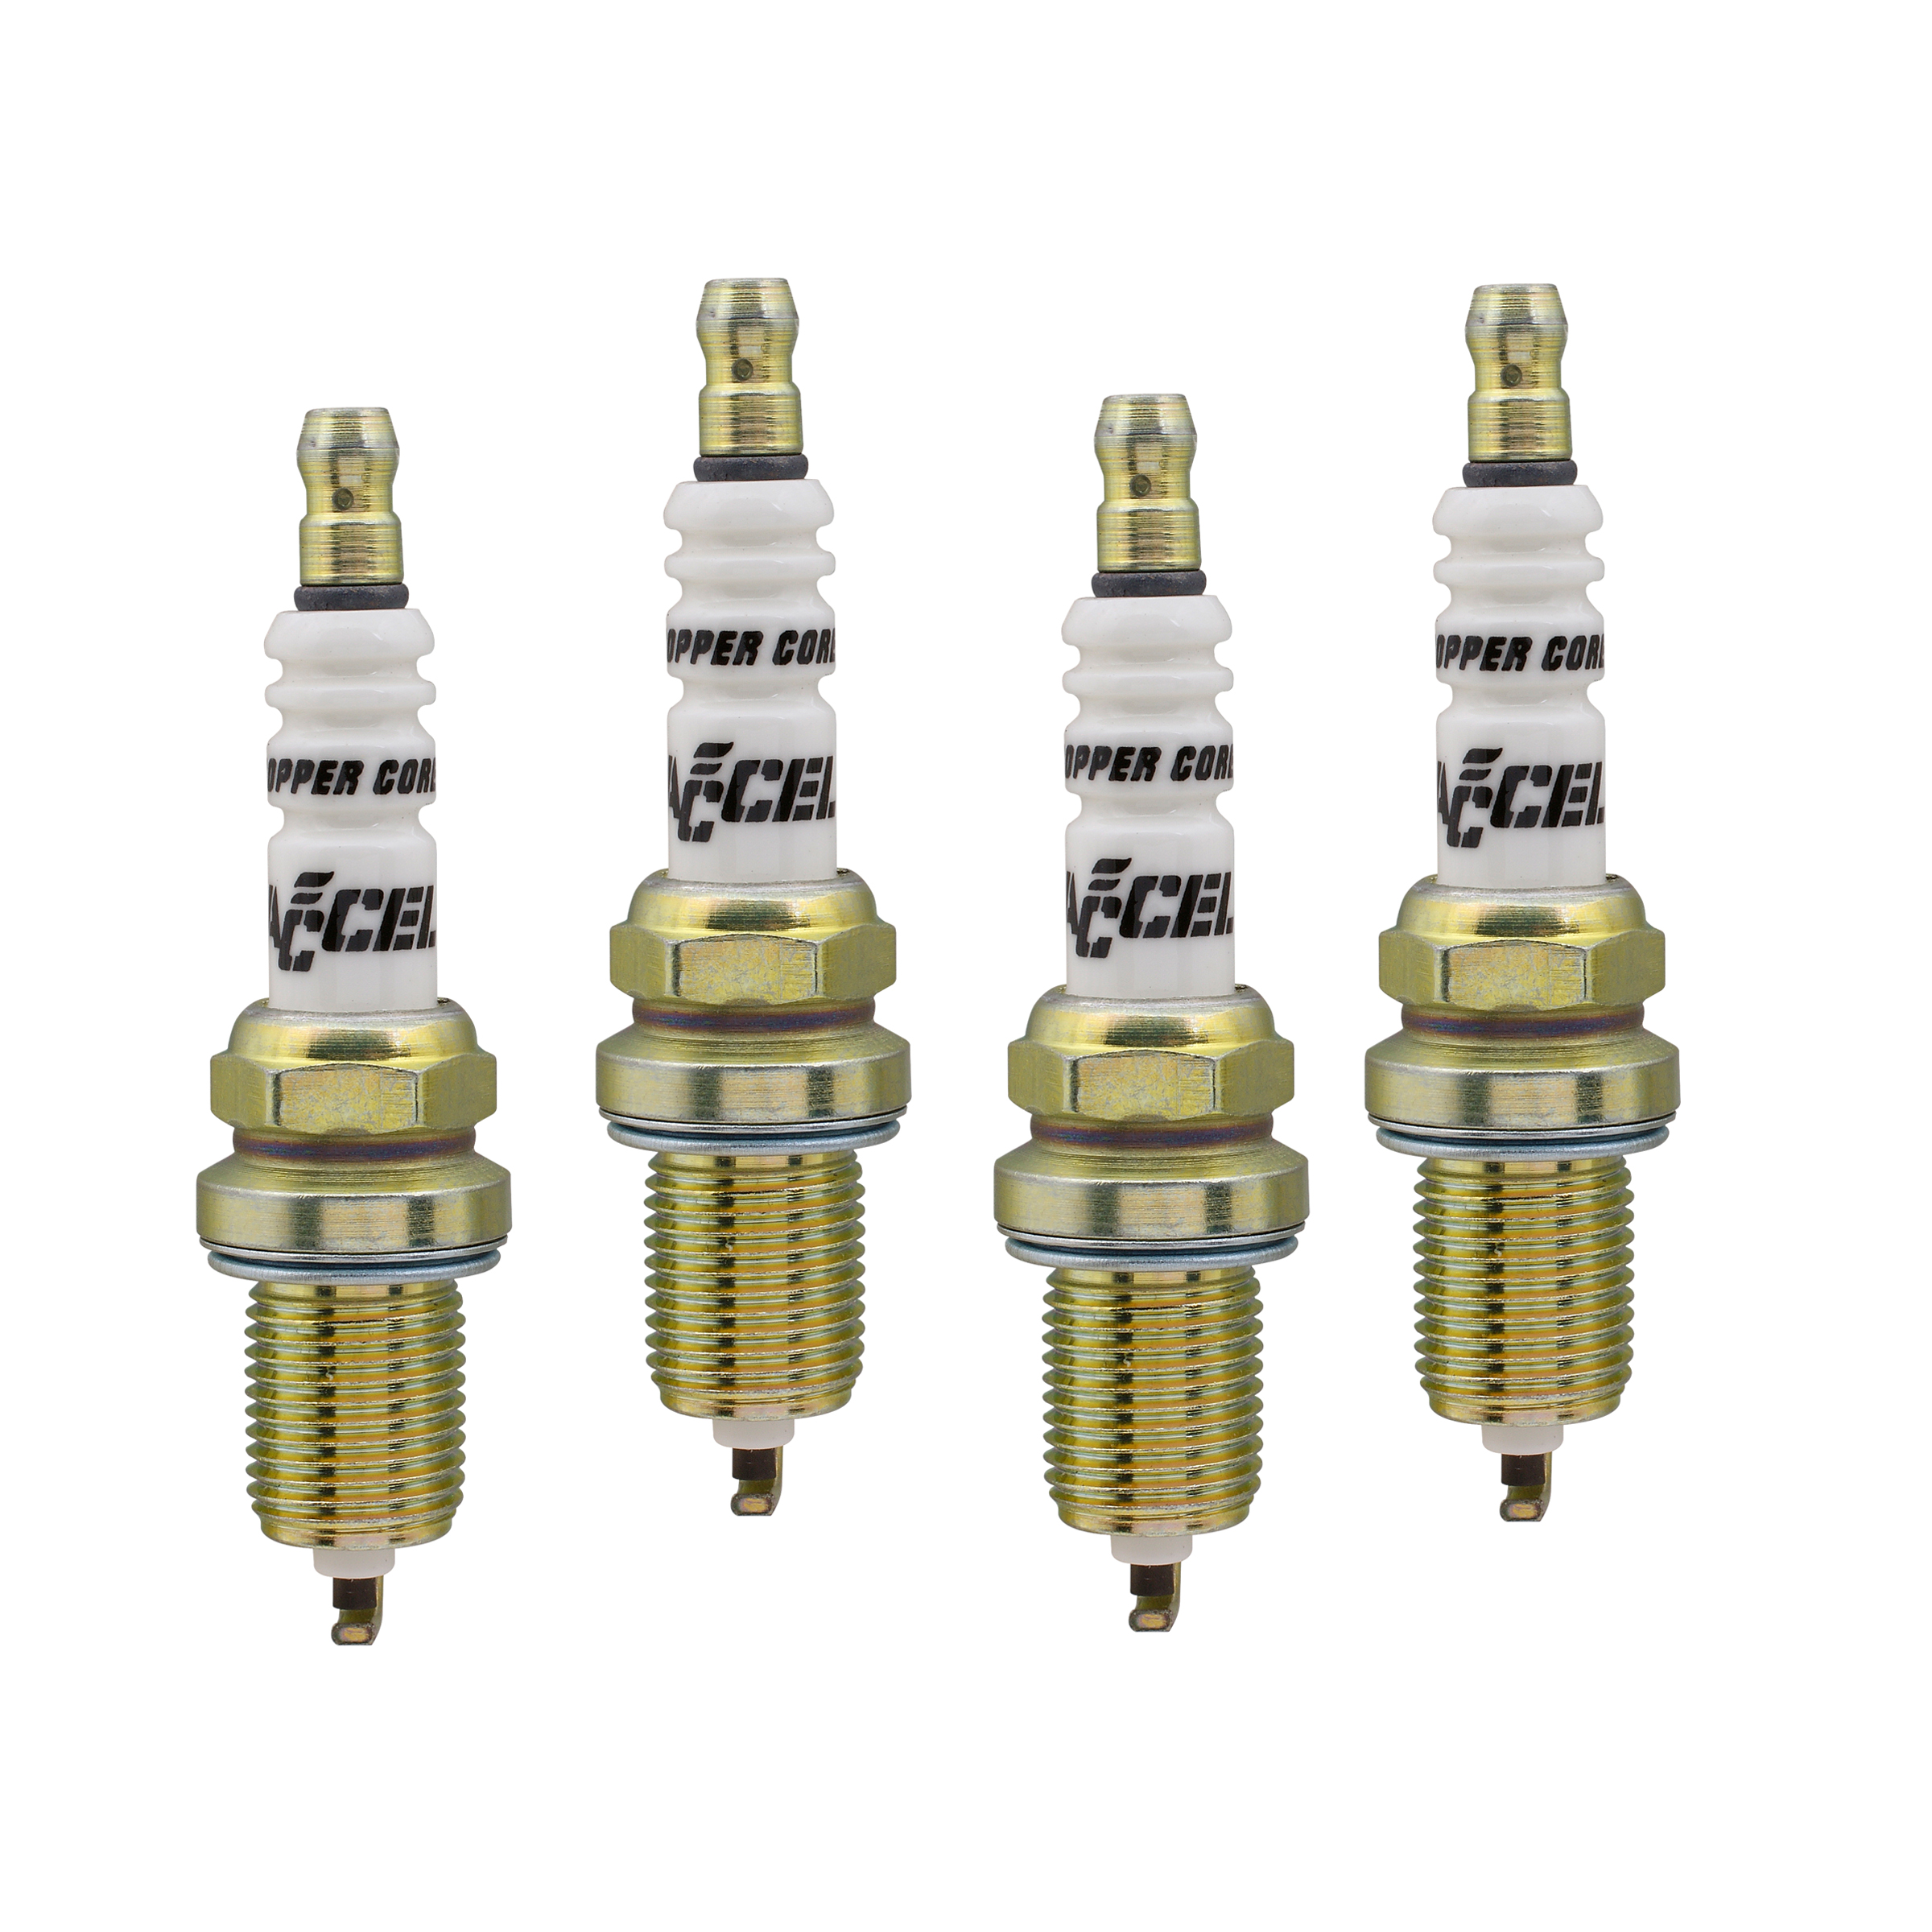 4 Pack ACCEL PLUGS 07864 Copper Spark Plug with Resistor 